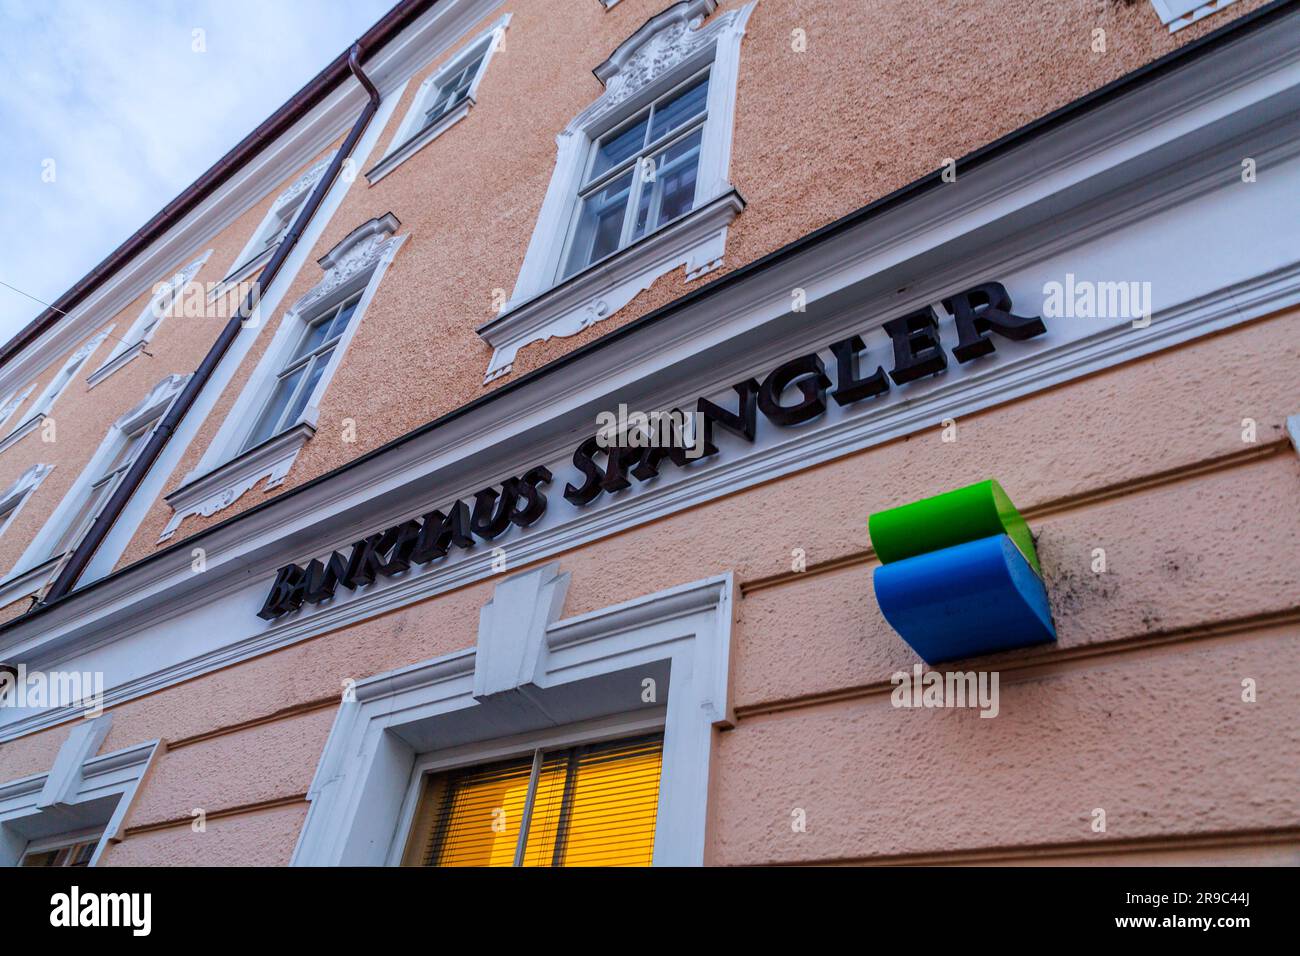 Salzburg, Austria - December 27, 2021: Logo at the entrance of Bankhaus Spangler, the oldest private bank in Austria founded in the state capital of S Stock Photo